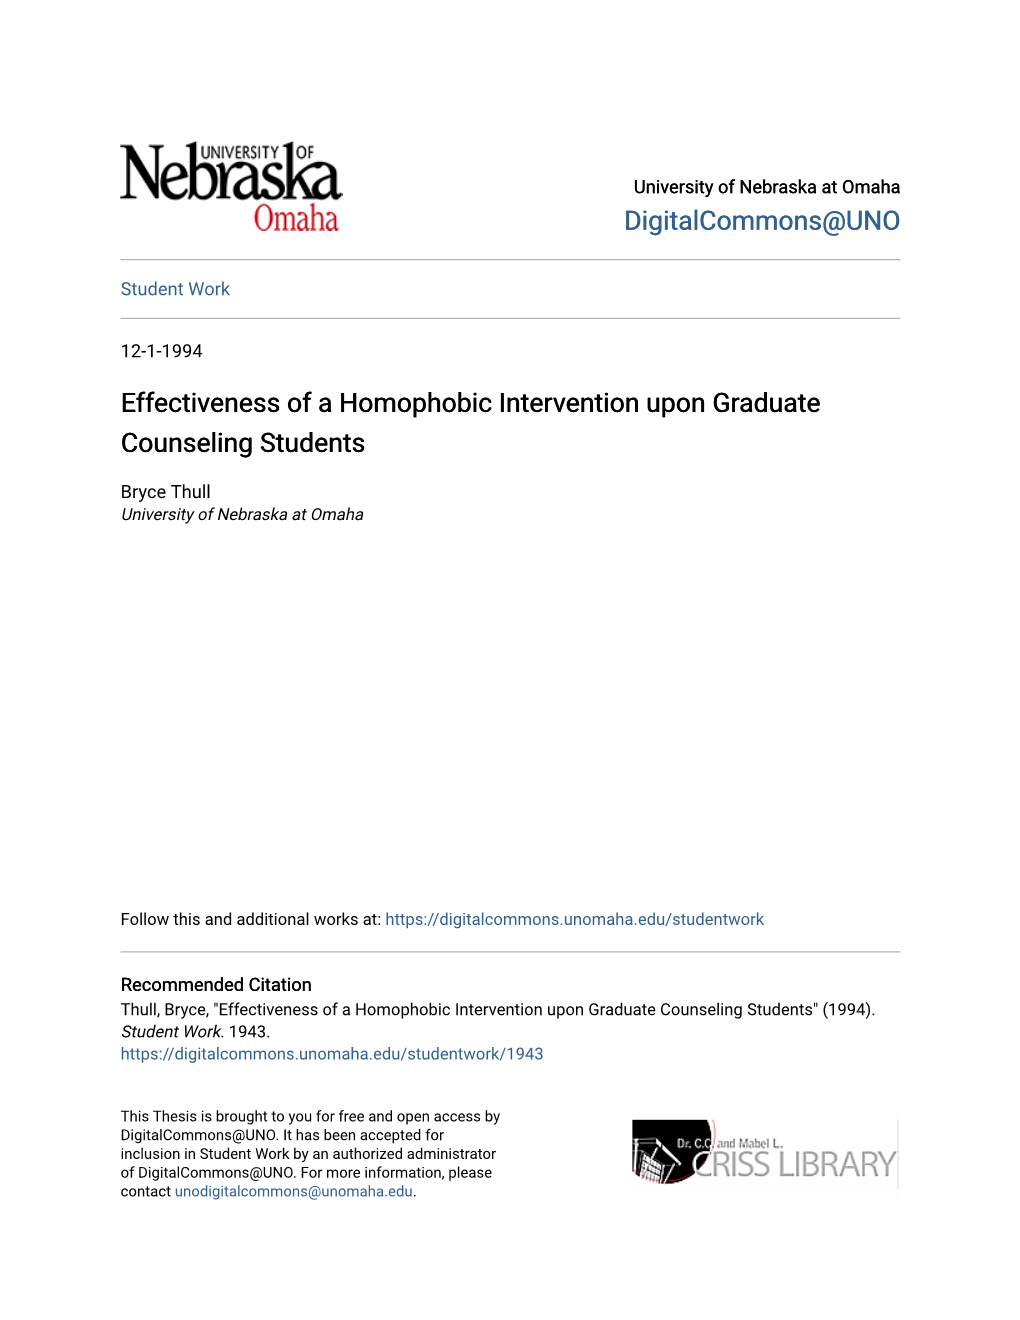 Effectiveness of a Homophobic Intervention Upon Graduate Counseling Students